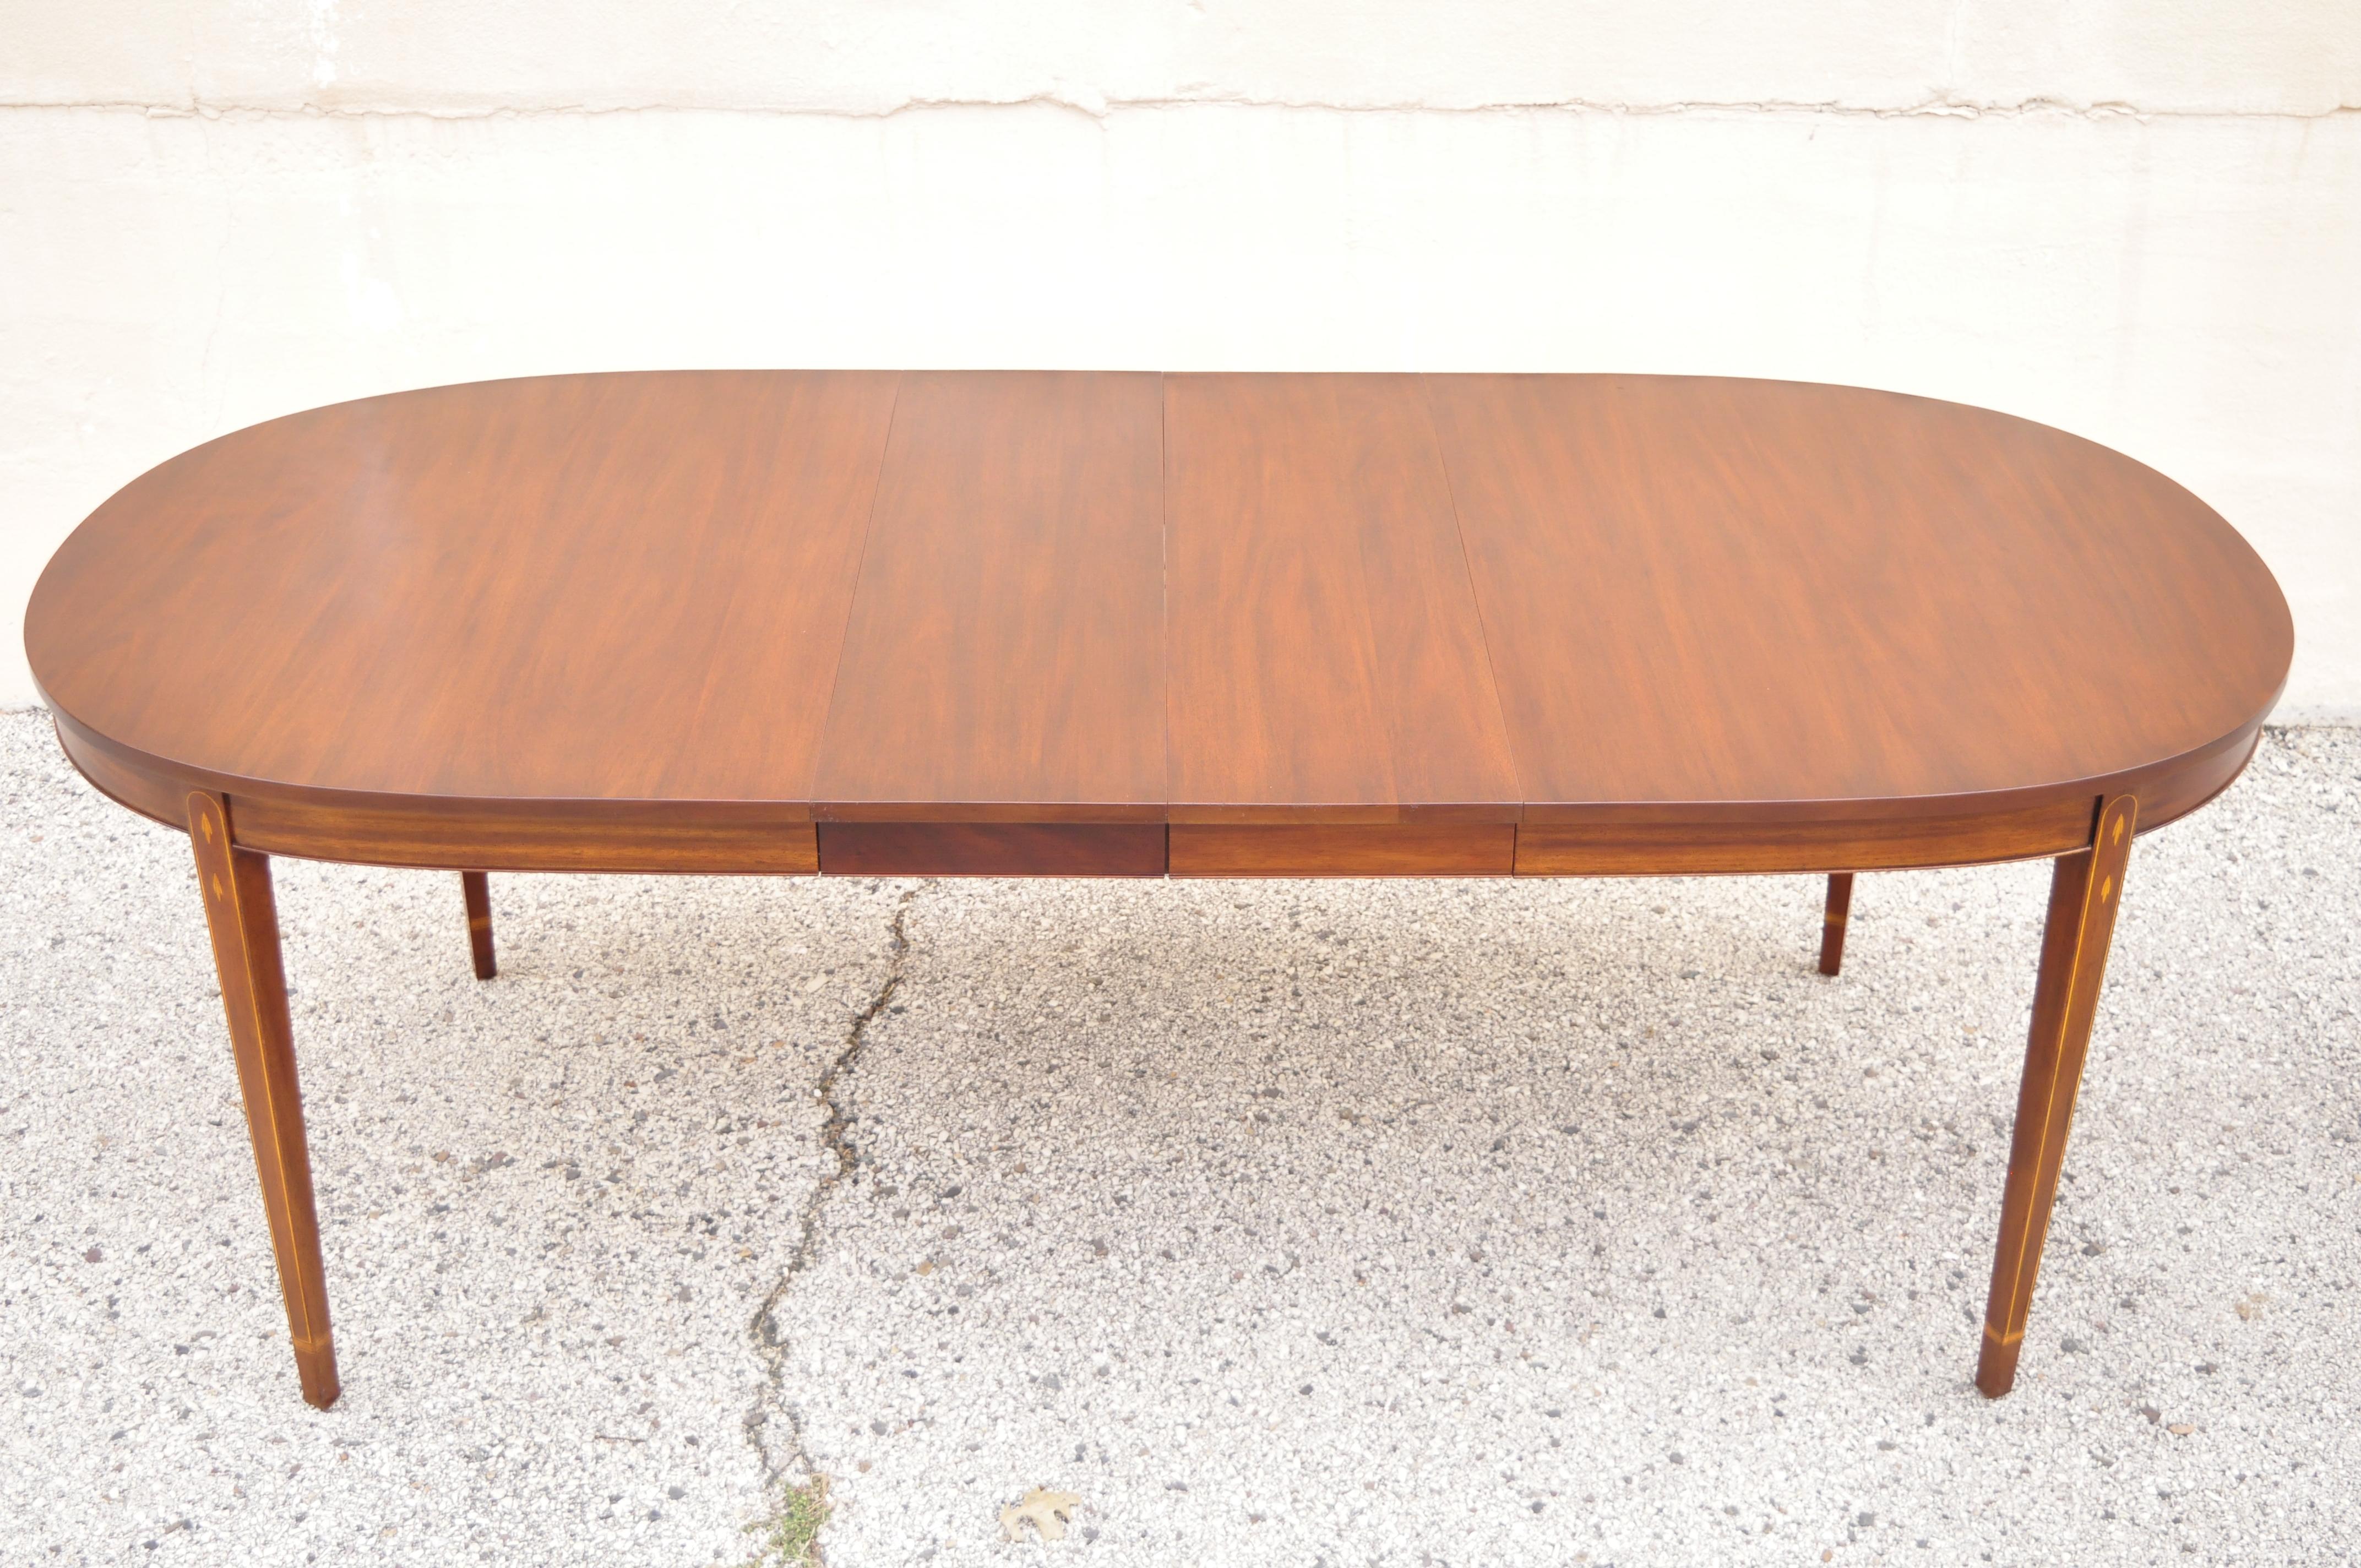 Henkel Harris oval mahogany dining room table with inlaid legs and two leaves. Item features (2) 12